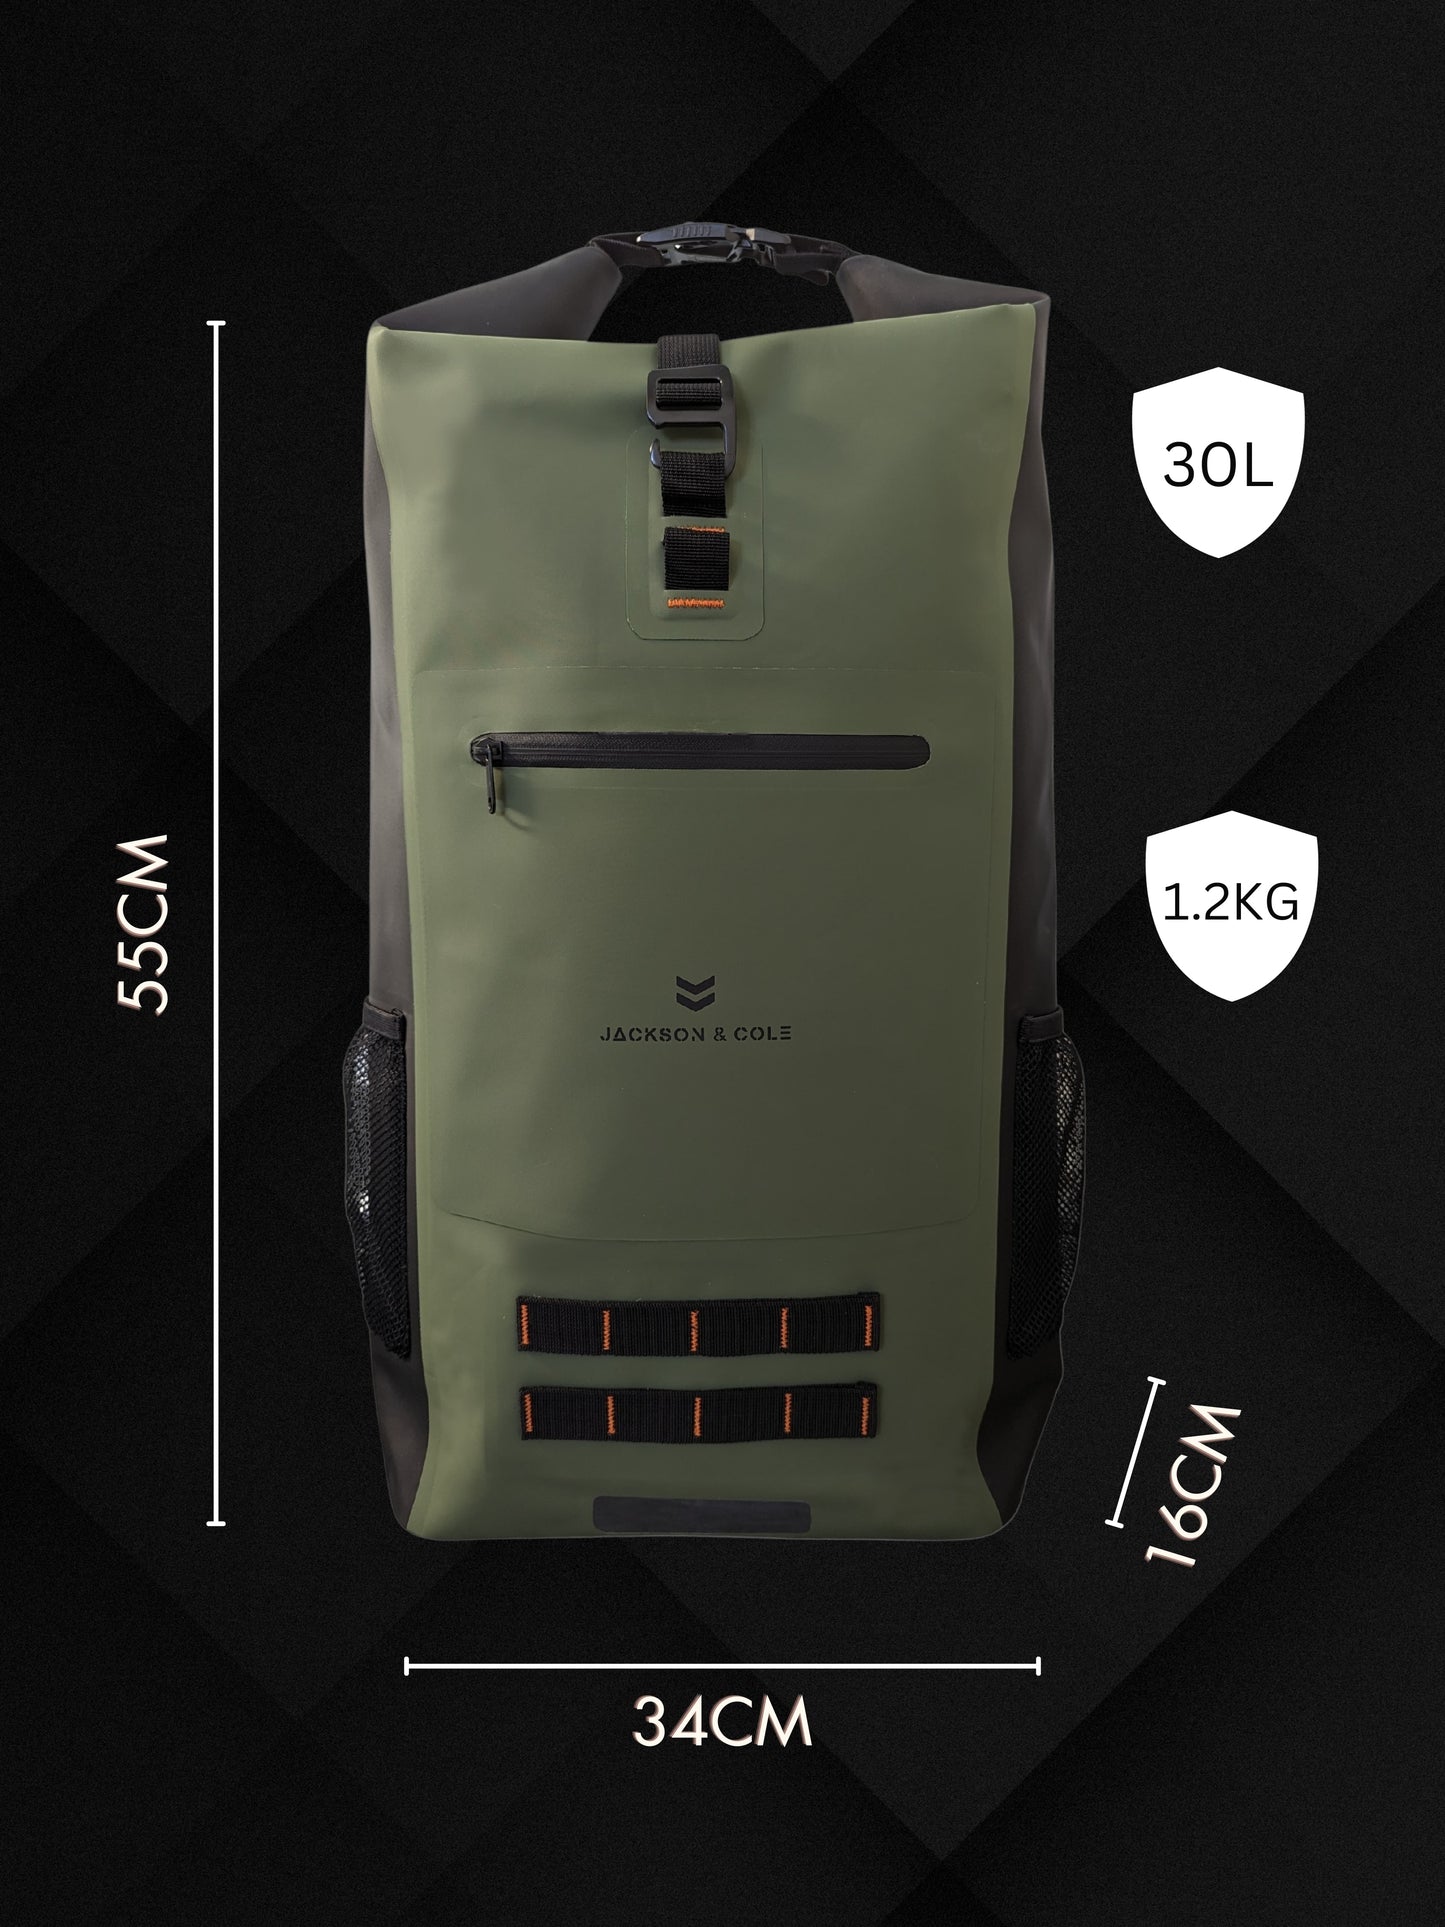 Backpack dimensions